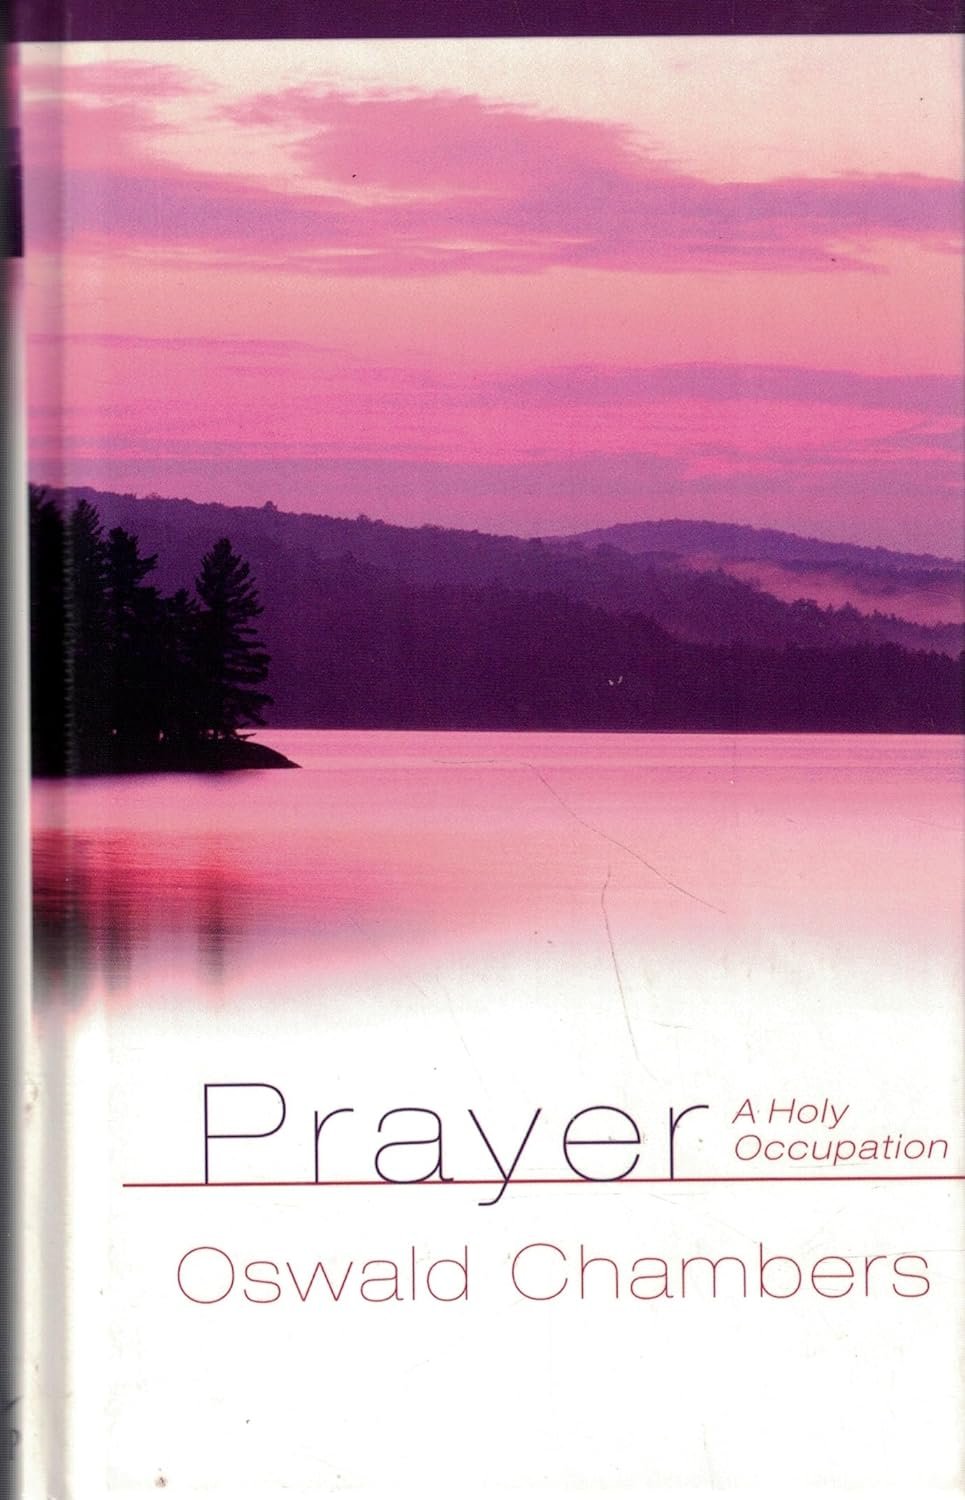 “Prayer: A Holy Occupation” - by Oswald Chambers